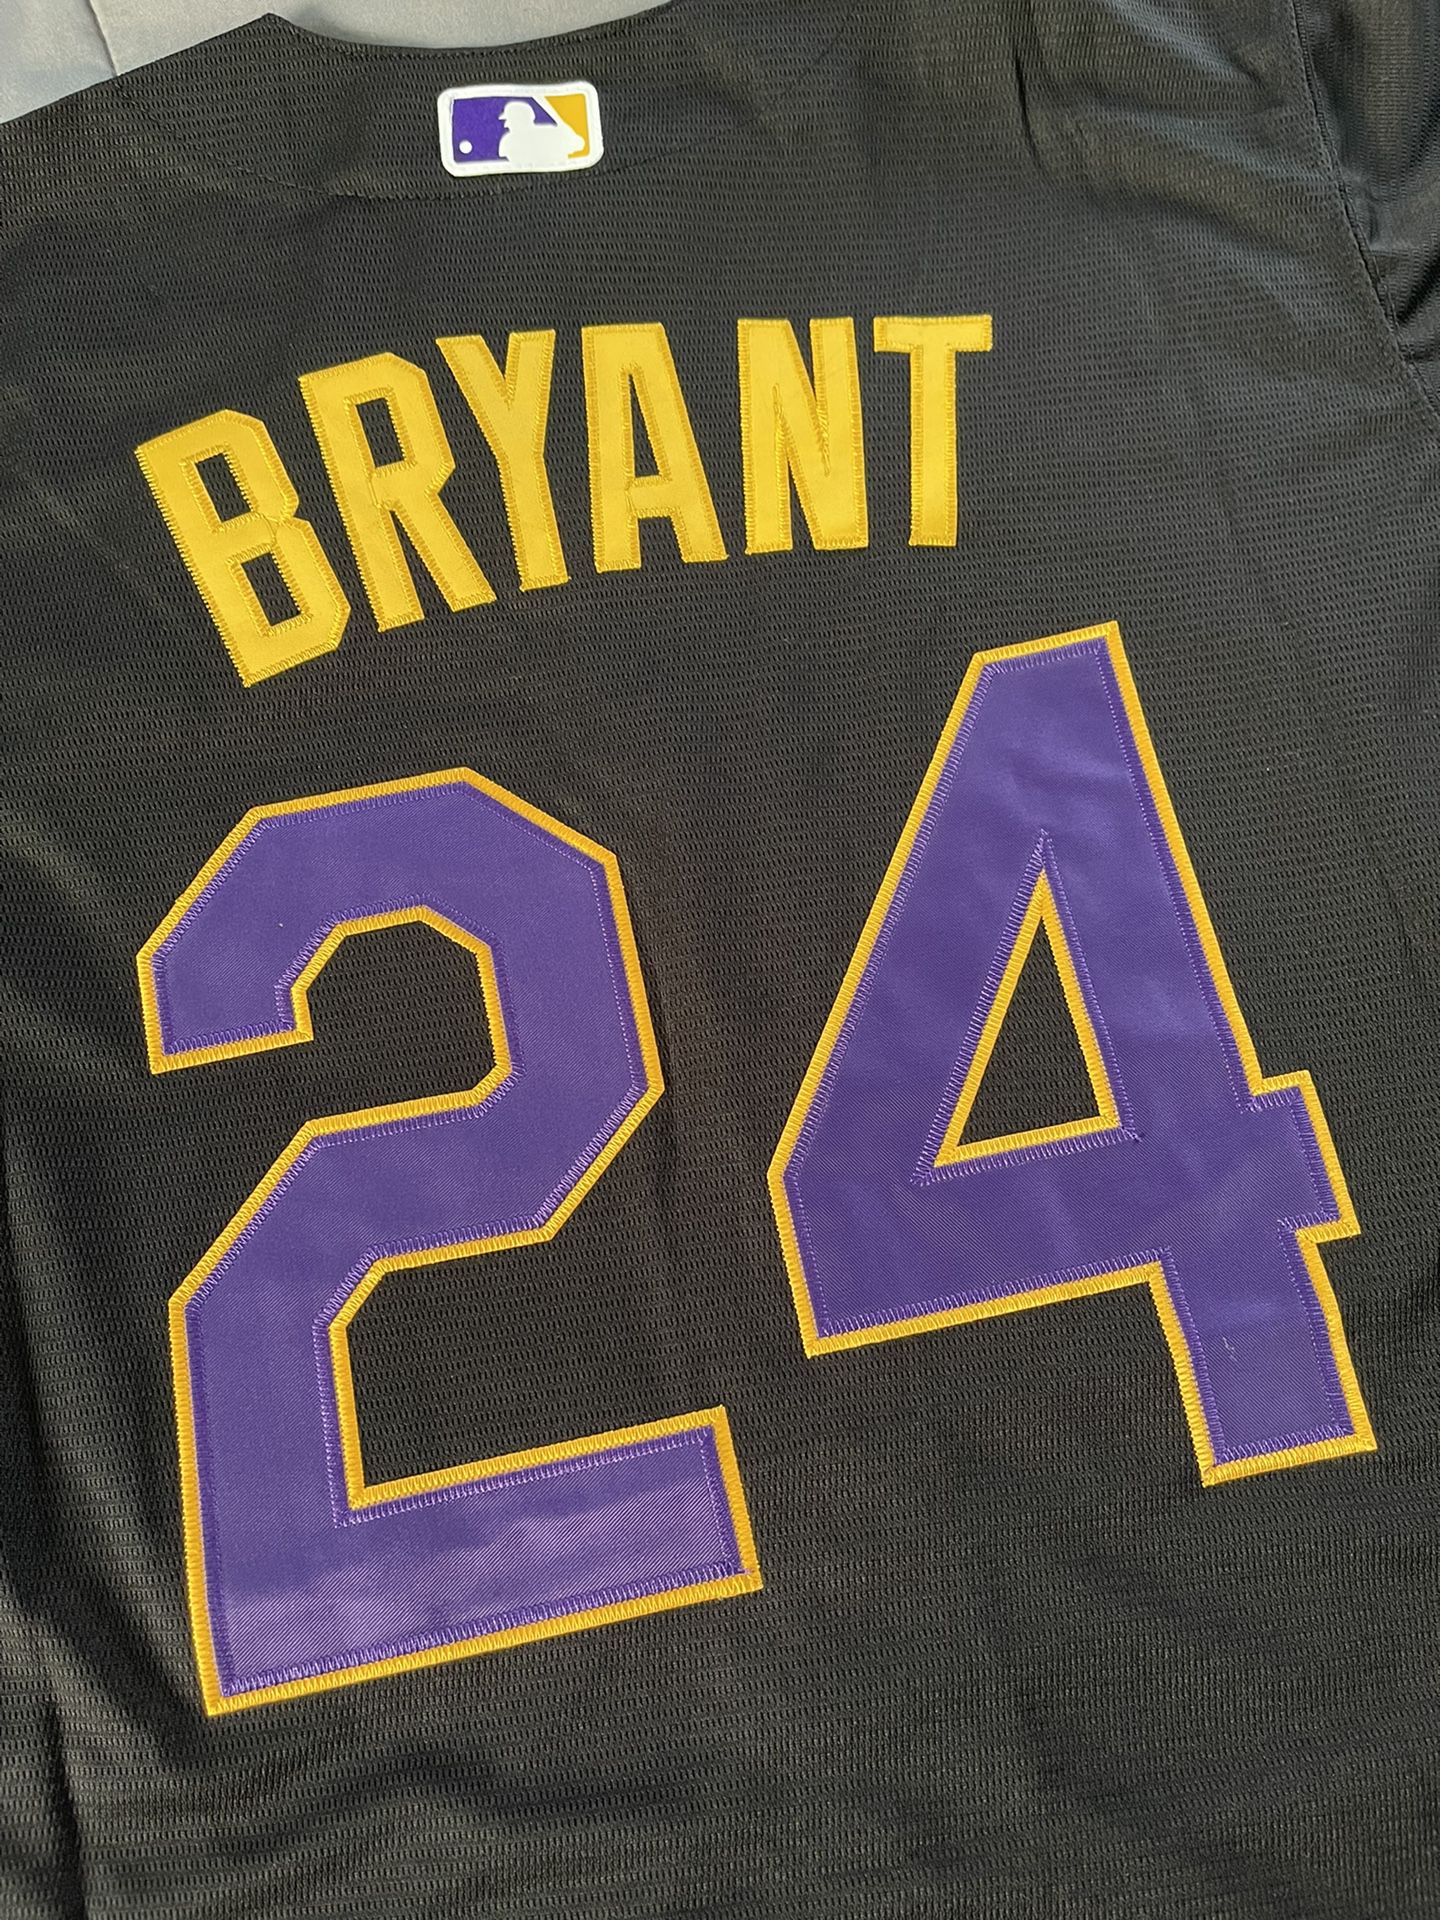 Kobe Bryant #24 NEW LA Lakers Classic Edition Basketball Vaporknit Jersey  size Medium (44) for Sale in Downey, CA - OfferUp